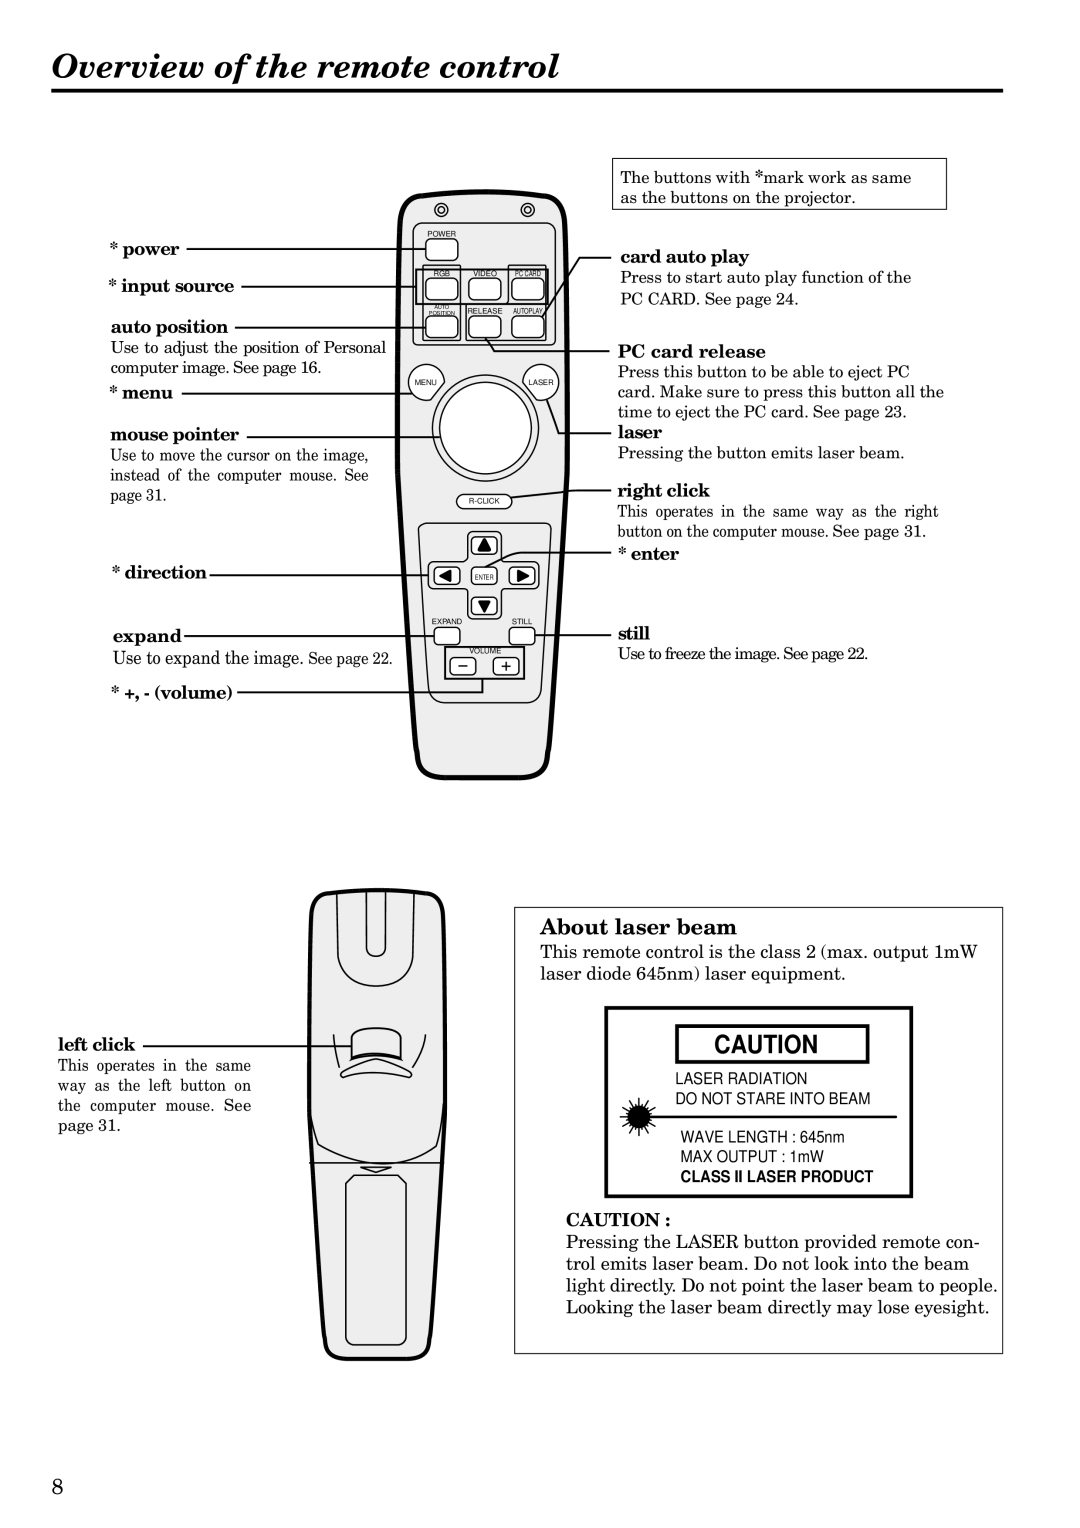 Mitsubishi Electronics LVP-S120A user manual Overview of the remote control, About laser beam 